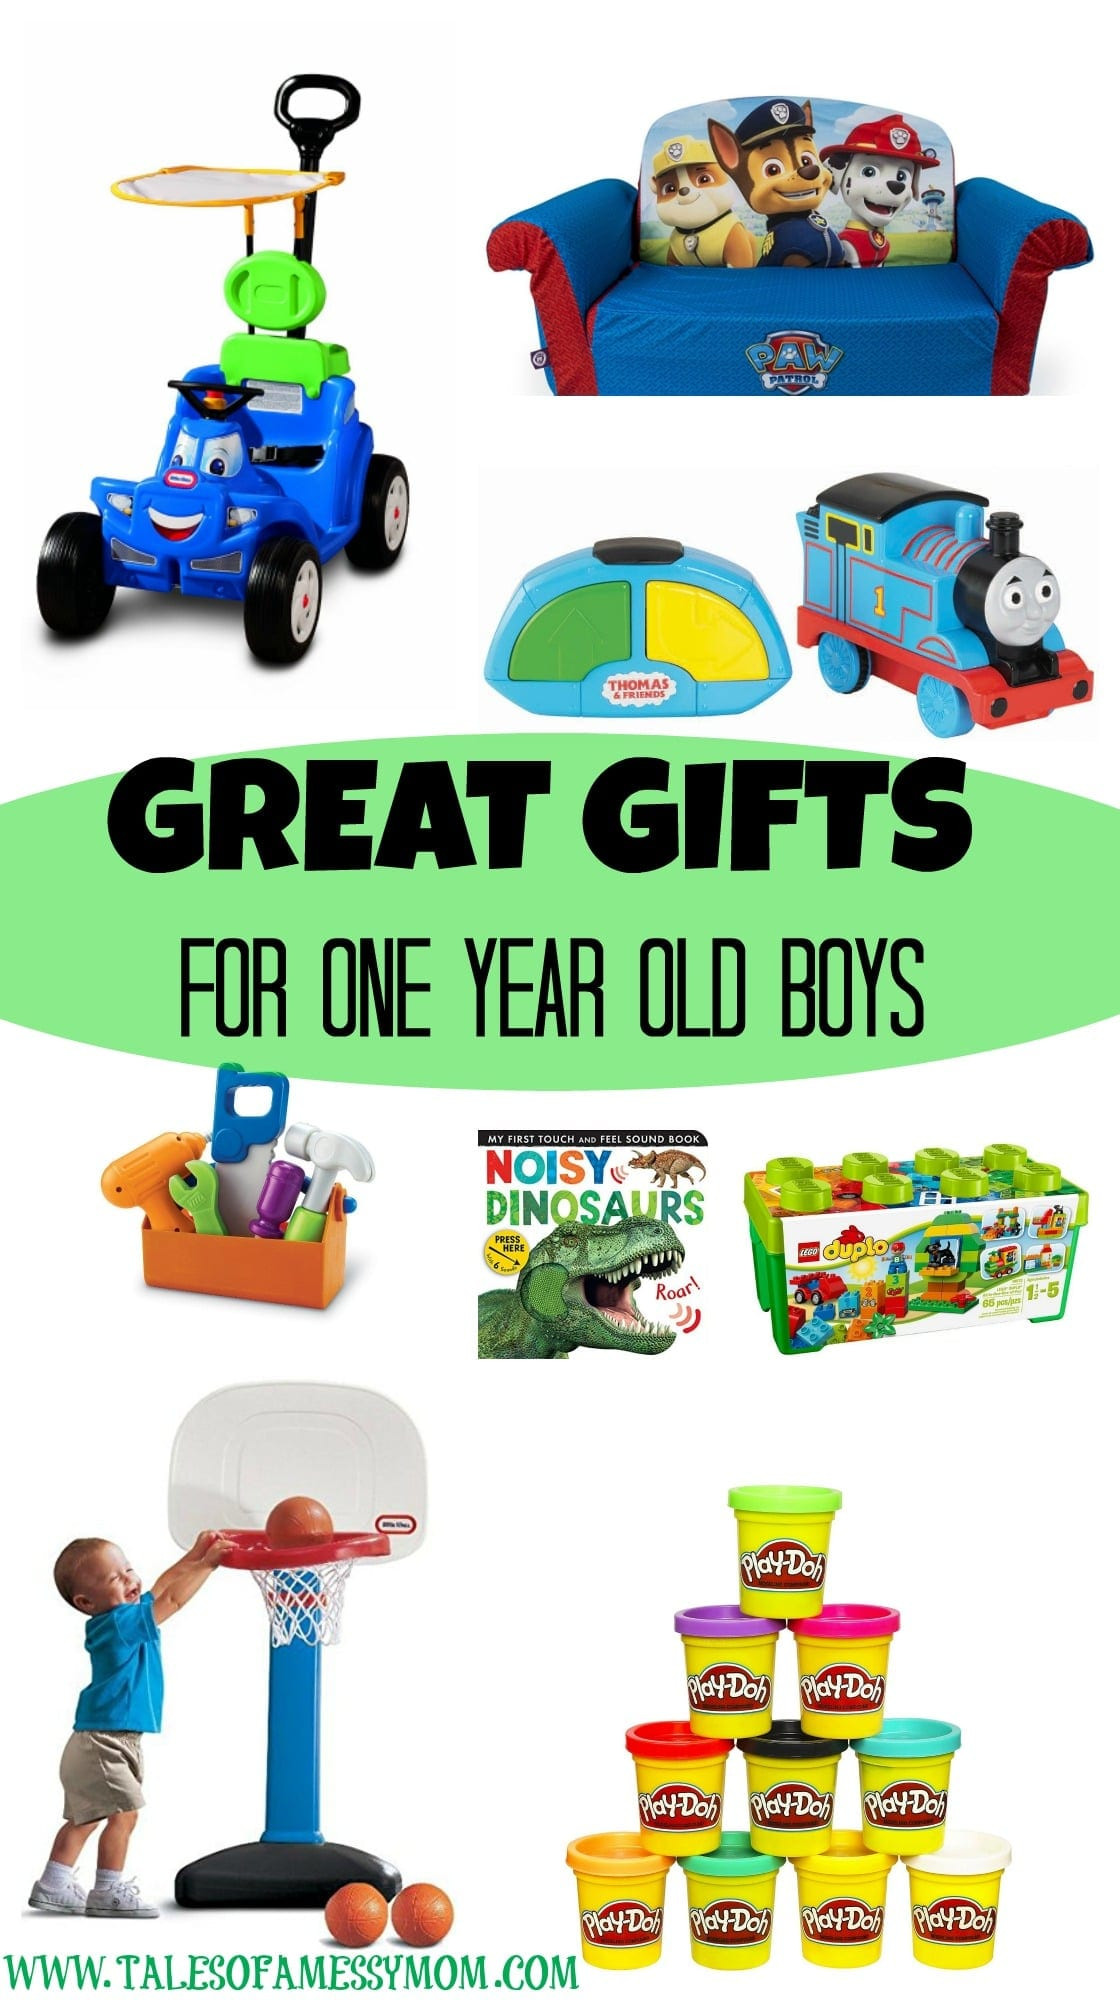 Gift Ideas For 1 Year Old Boys
 Gift Ideas for e Year Old Boys Tales of a Messy Mom